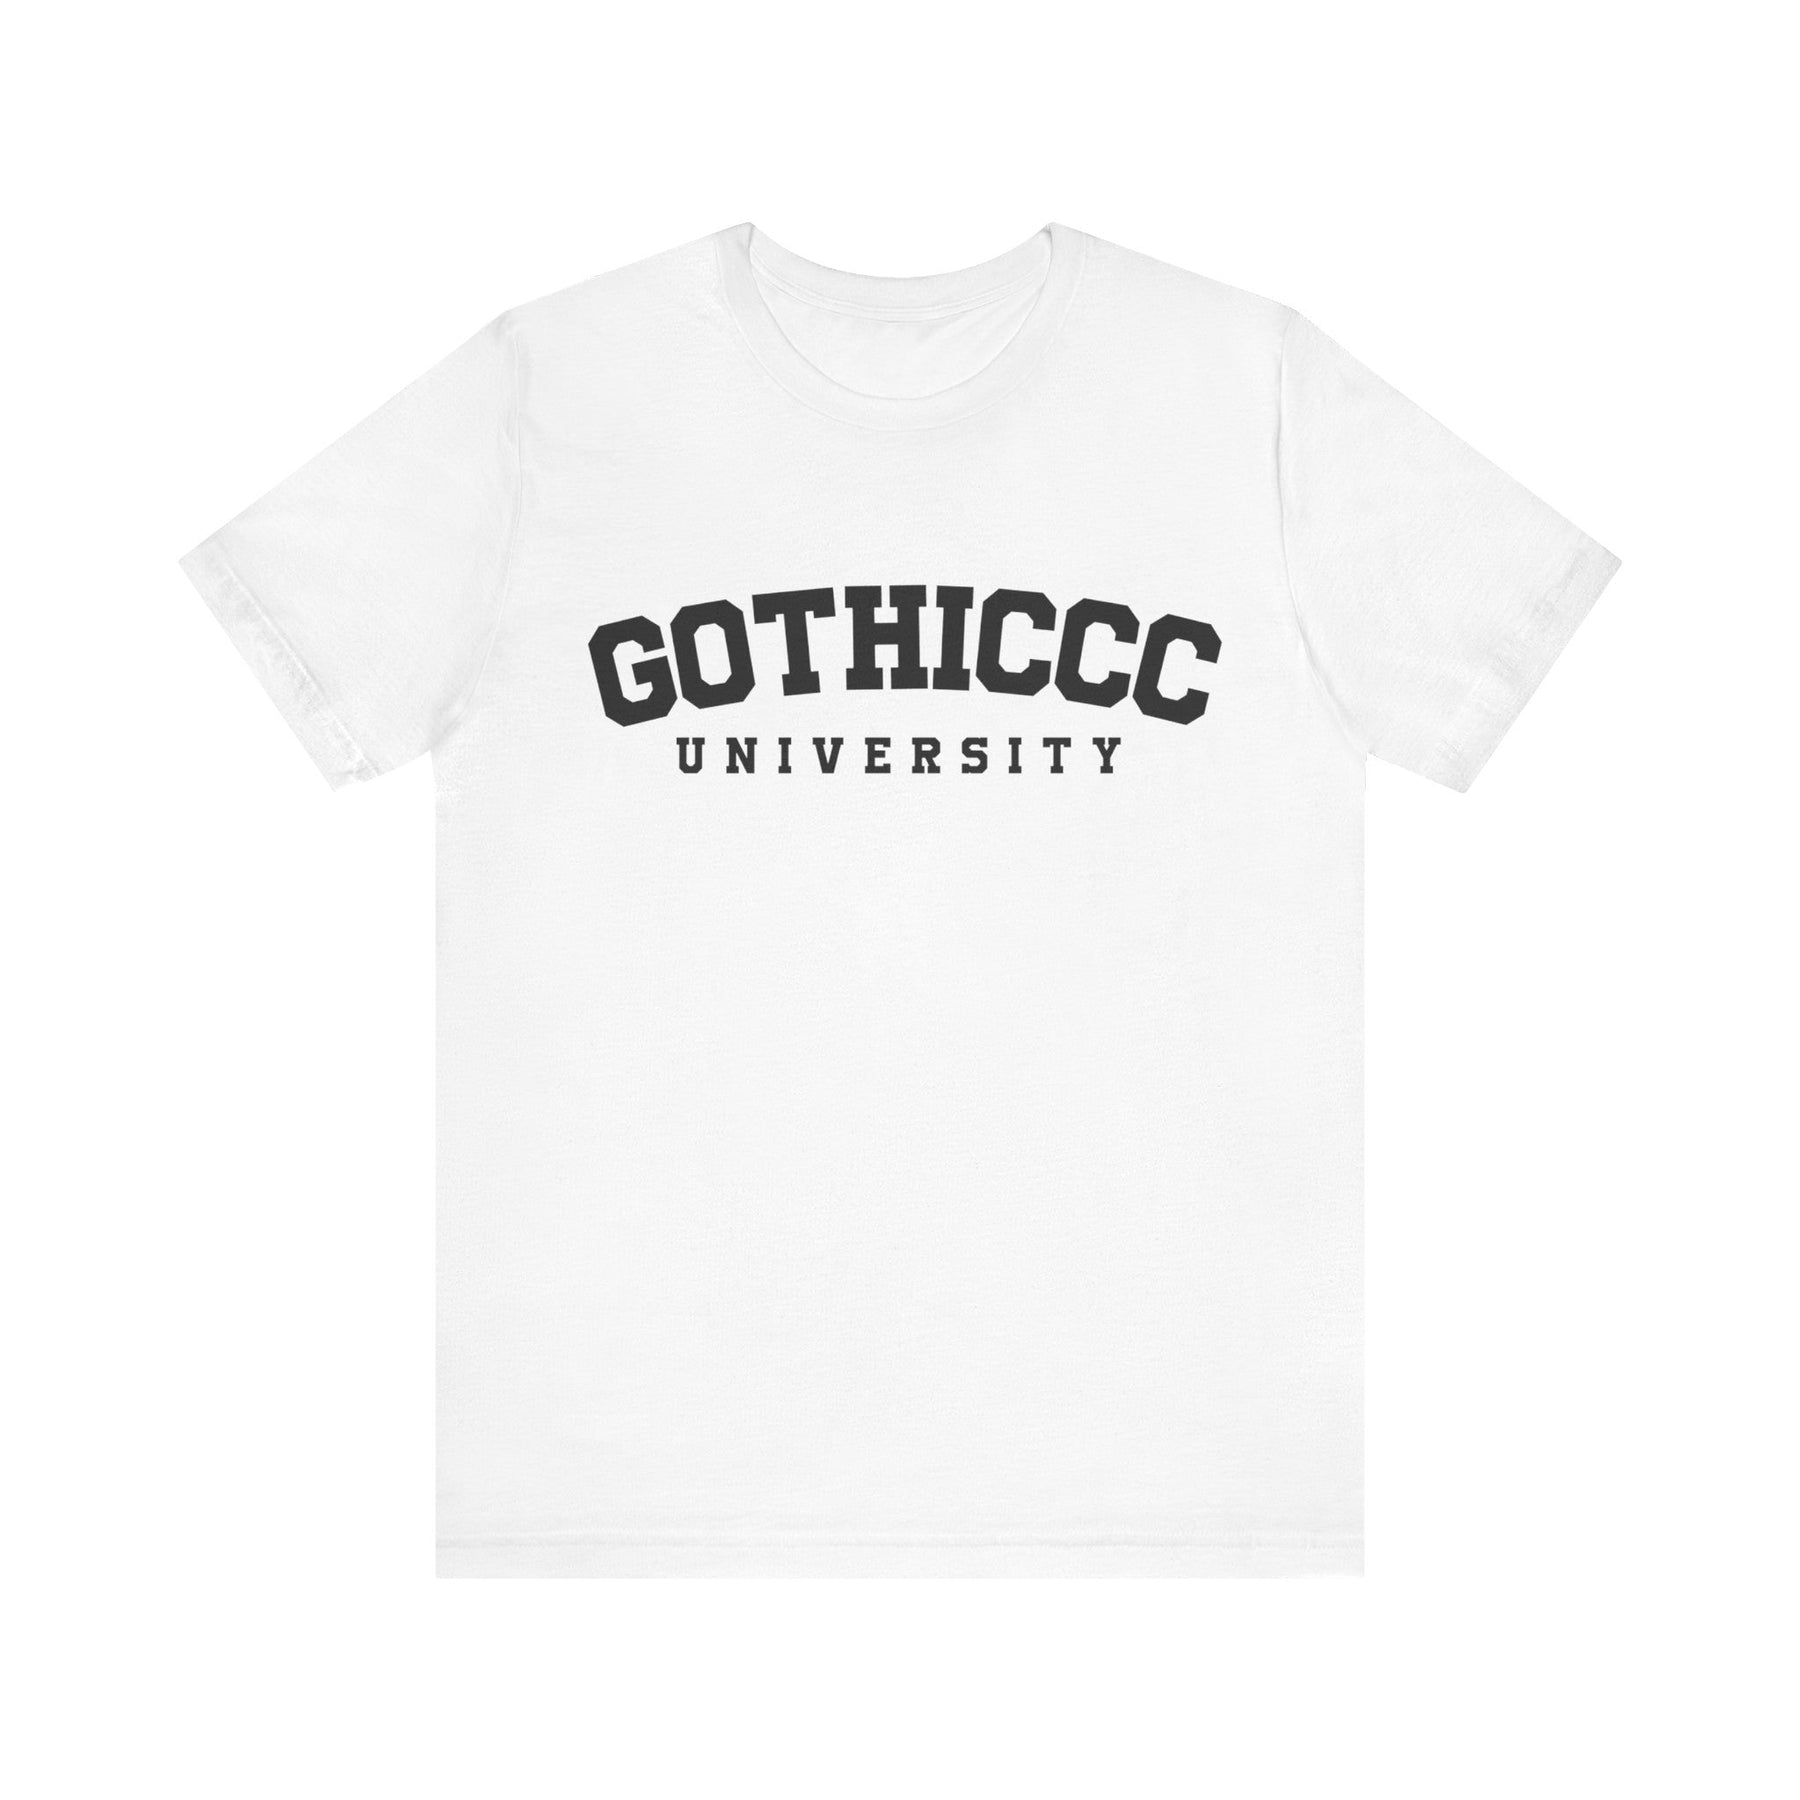 Gothiccc University Short Sleeve Tee - Goth Cloth Co.T - Shirt17428285585403210411